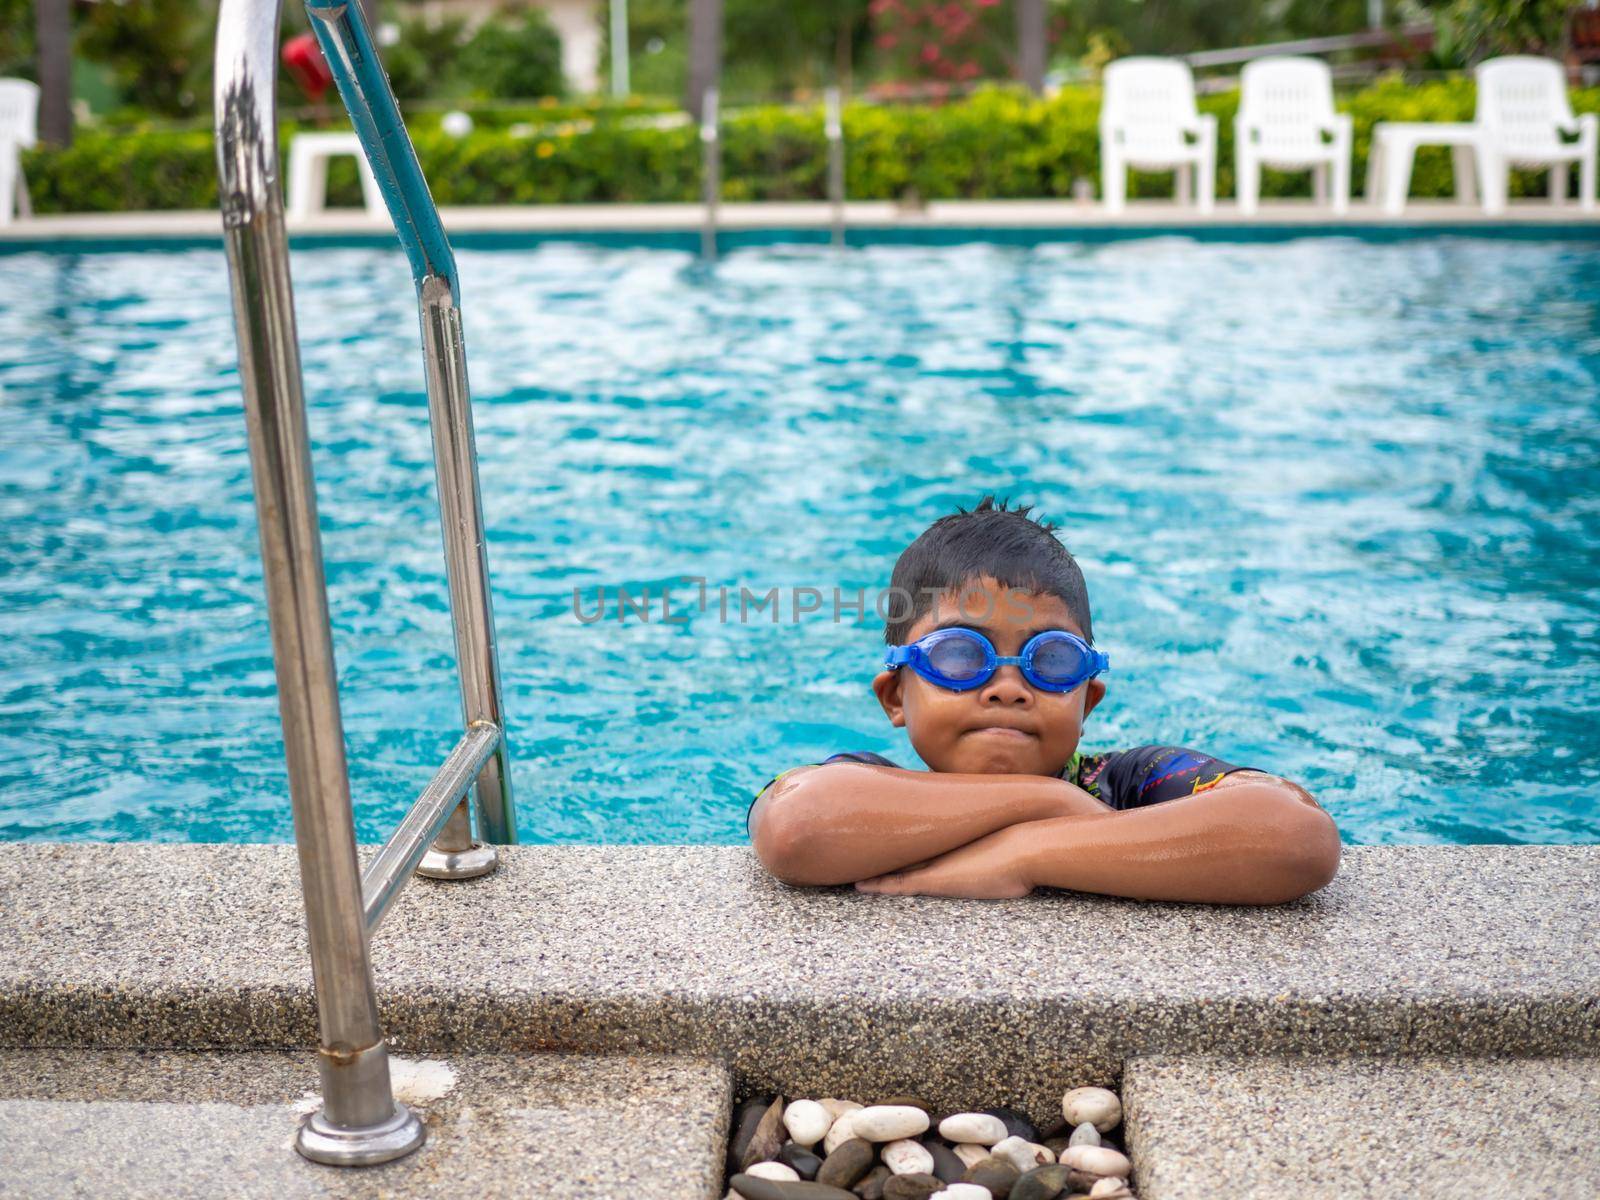 The boy wearing swimsuits and glasses Smile while perched on the edge of the swimming pool.